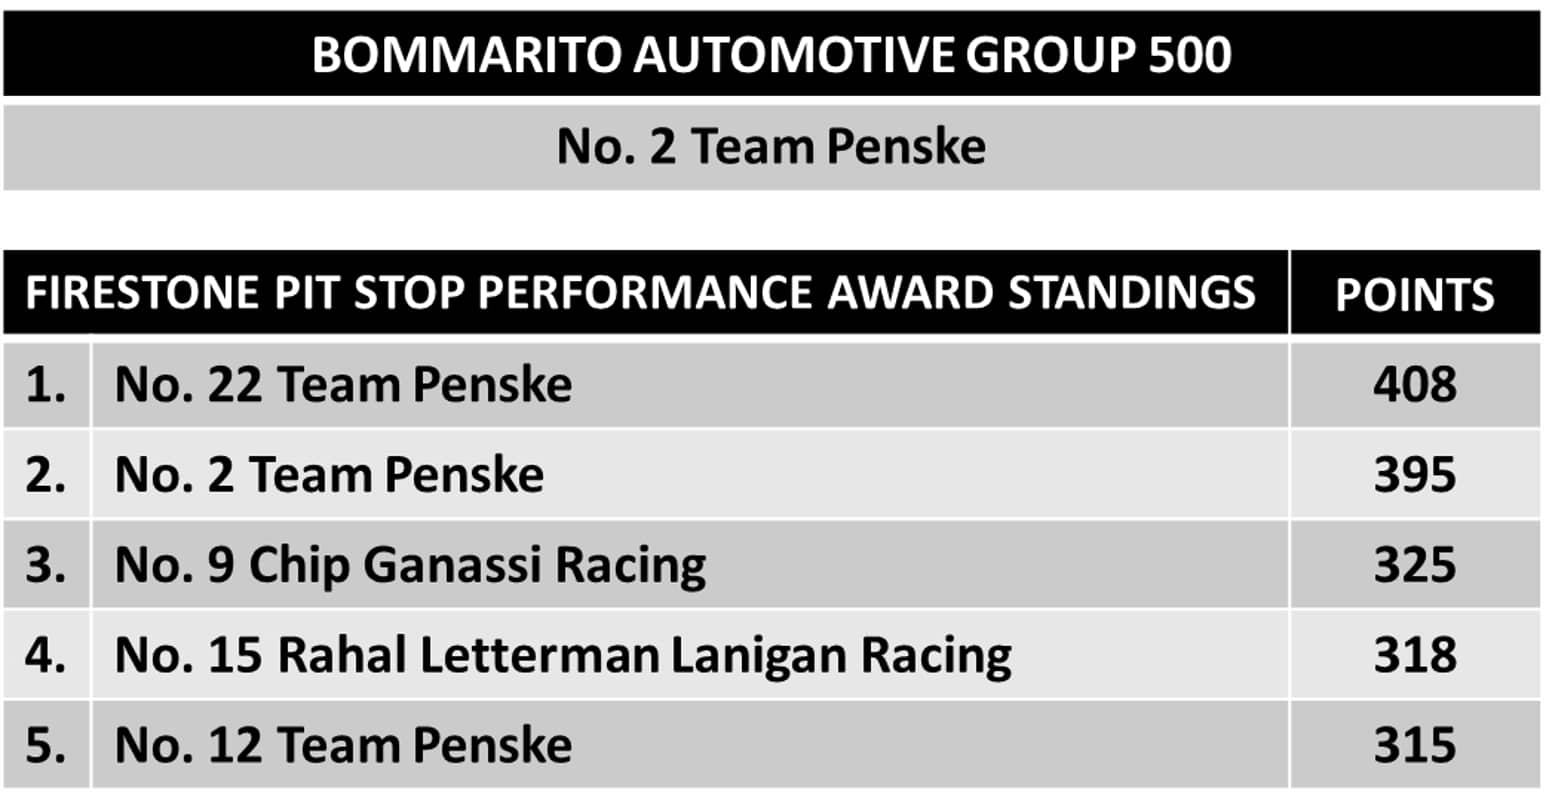 Table showing Bommarito Automotive Group 500 point totals.